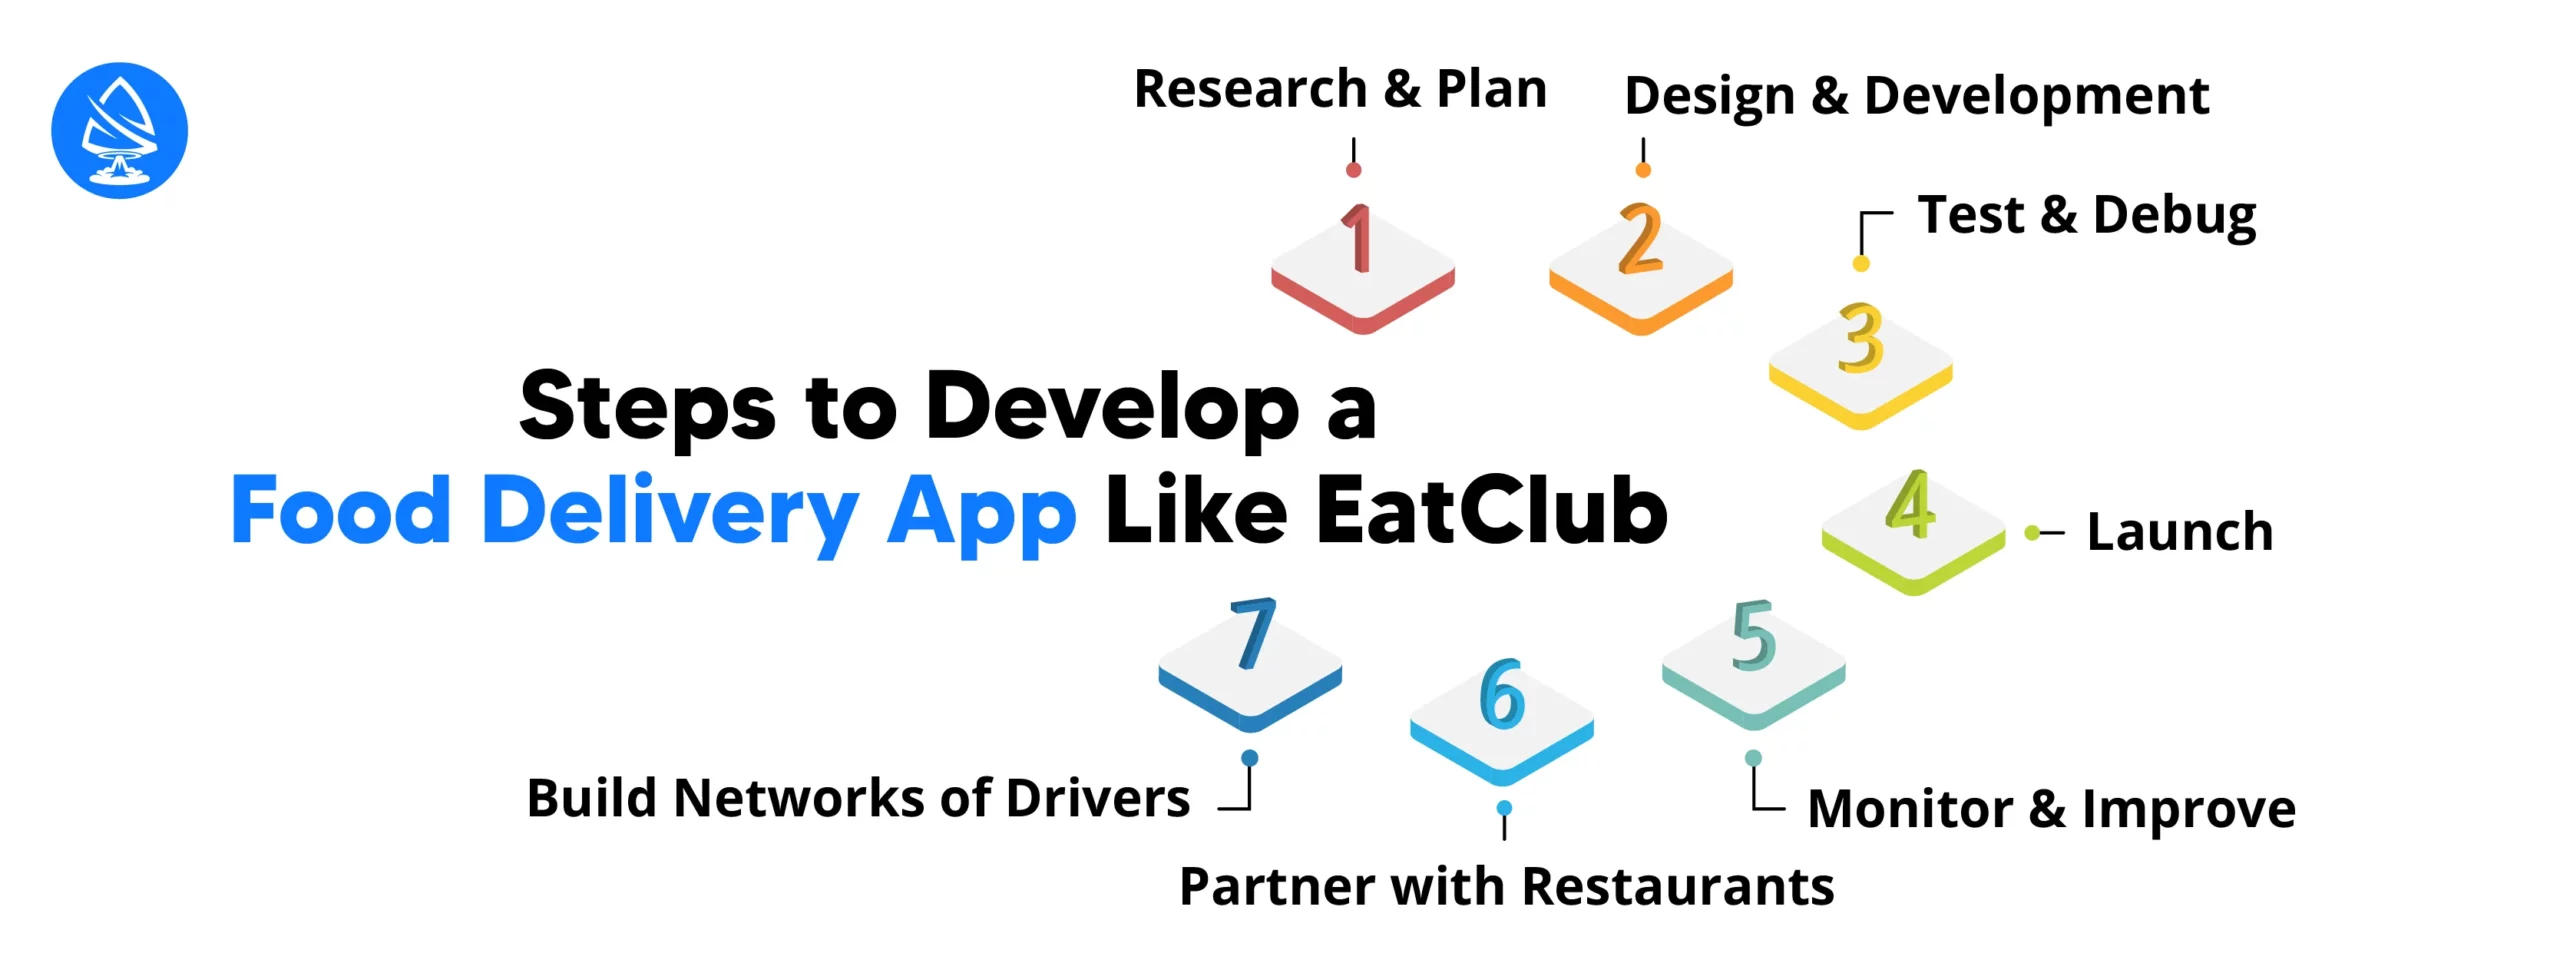 Steps to Develop a Food Delivery App Like EatClub